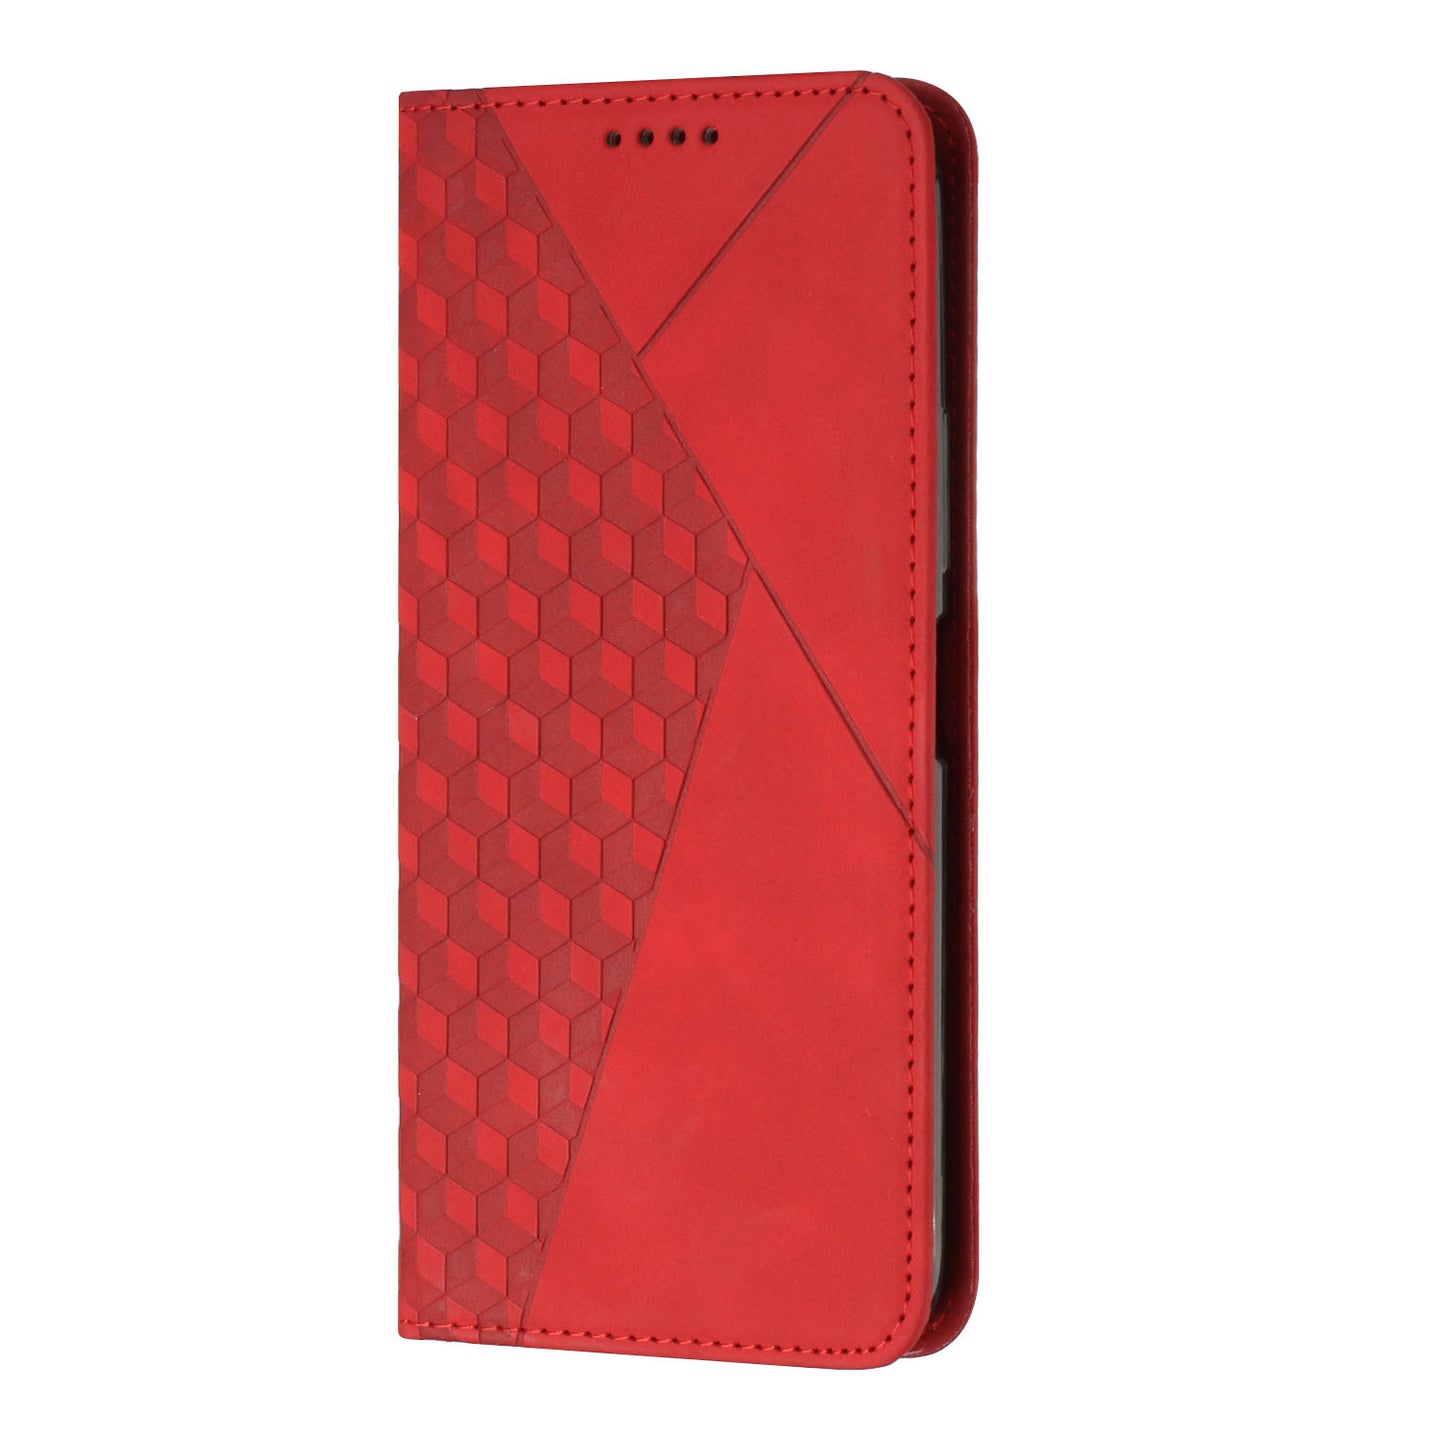 Luxury Business Style TPU PU Soft Gentle Shockproof Cover leather Case For Samsung S22 S21 Ulrta S20 S10 plus Note